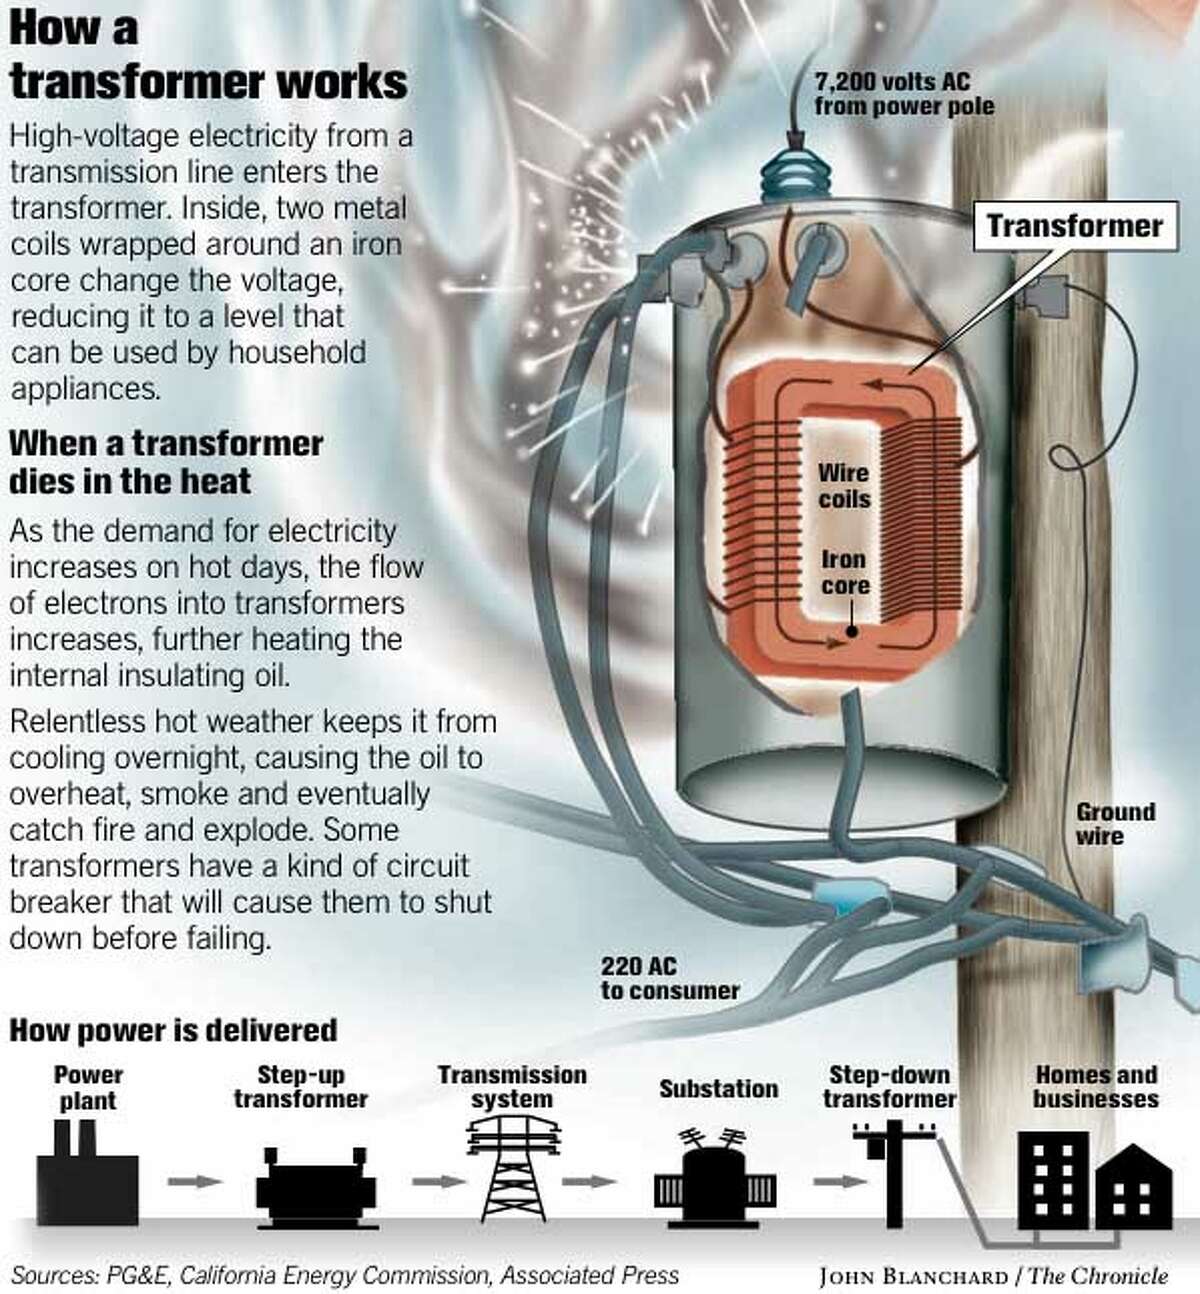 Who Revolutionized Electricity with the Transformer?